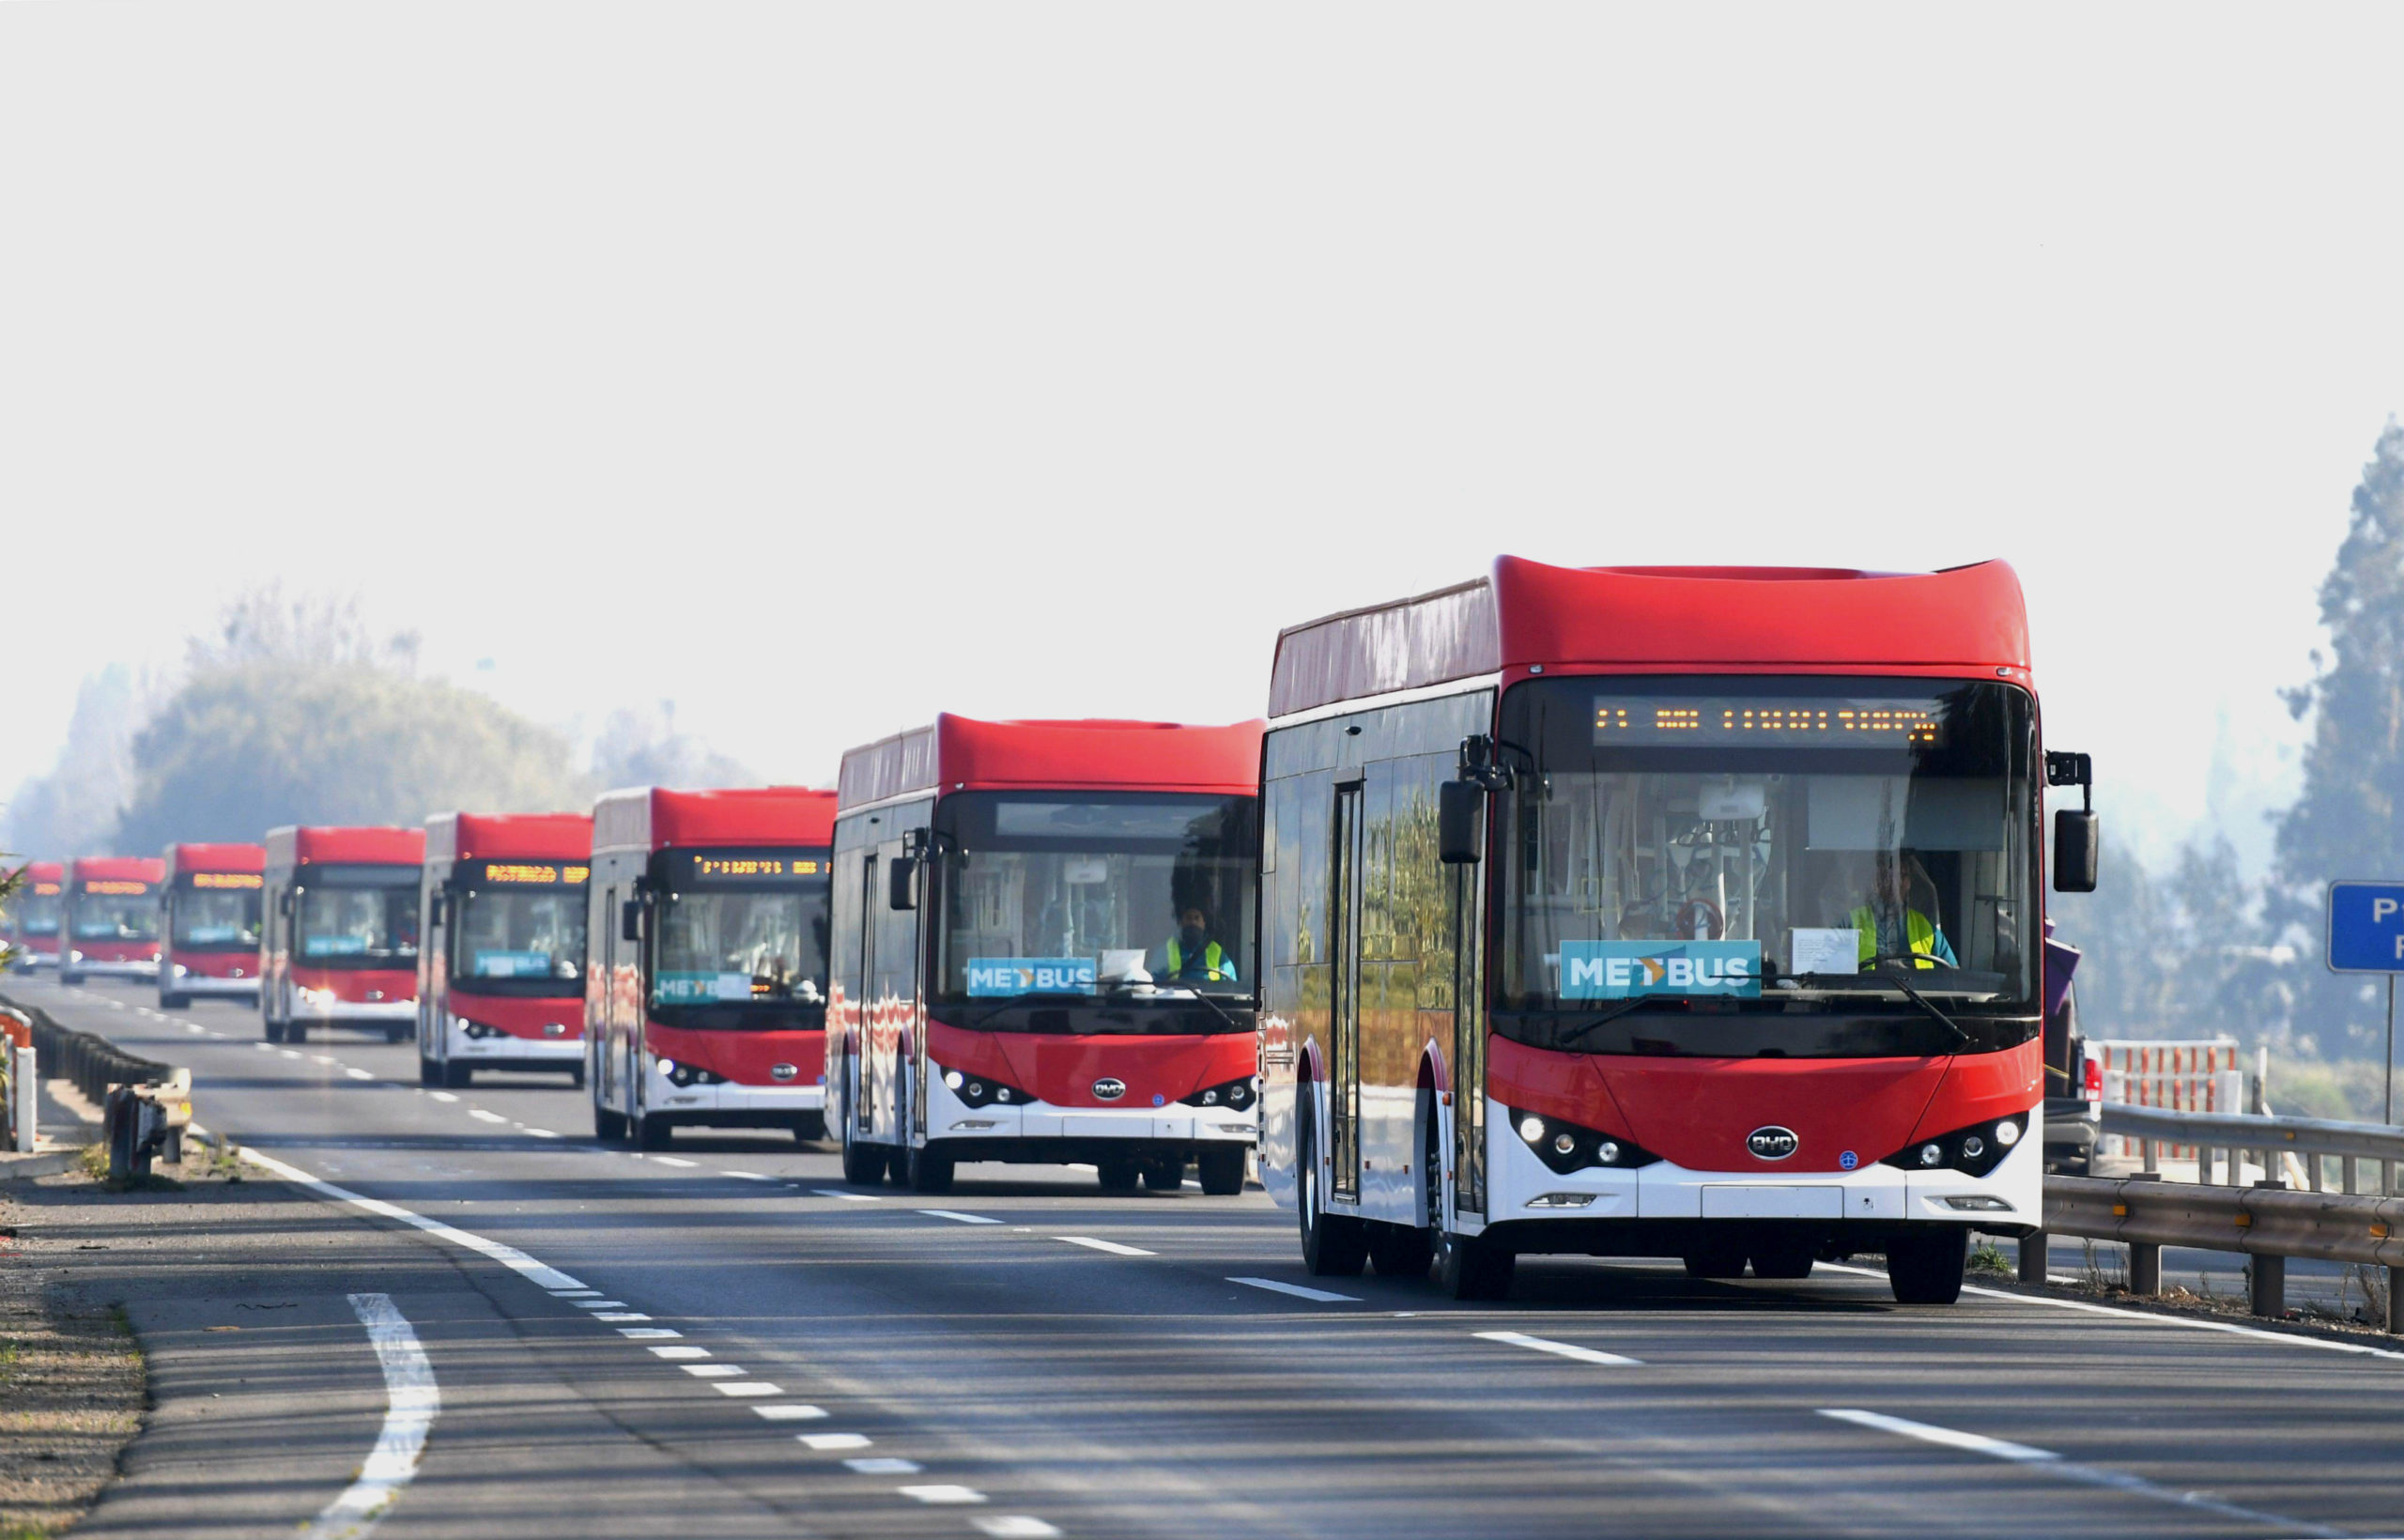 Electric buses manufactured by Chinese company BYD heading for Santiago, Chile. (Image: Alamy)